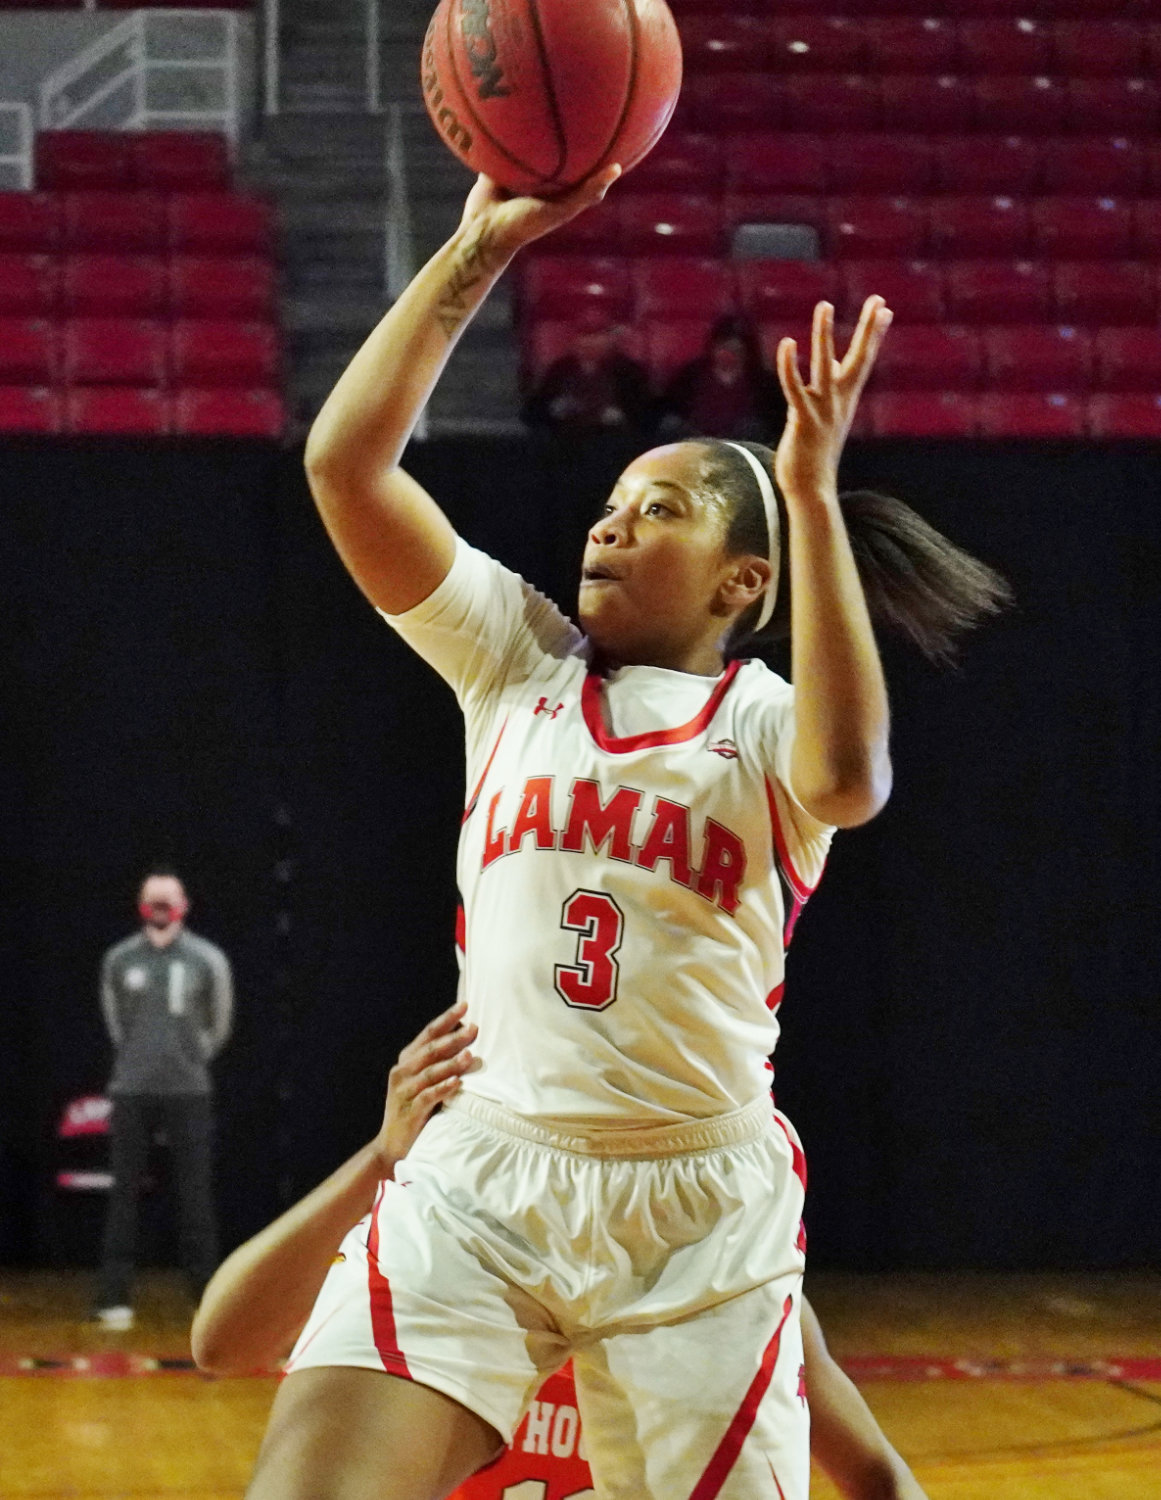 Mineola graduate Sabria Dean earned the Southland Conference Freshman Player of the Year recognition for her efforts with the Lamar University Cardinals women’s basketball team.